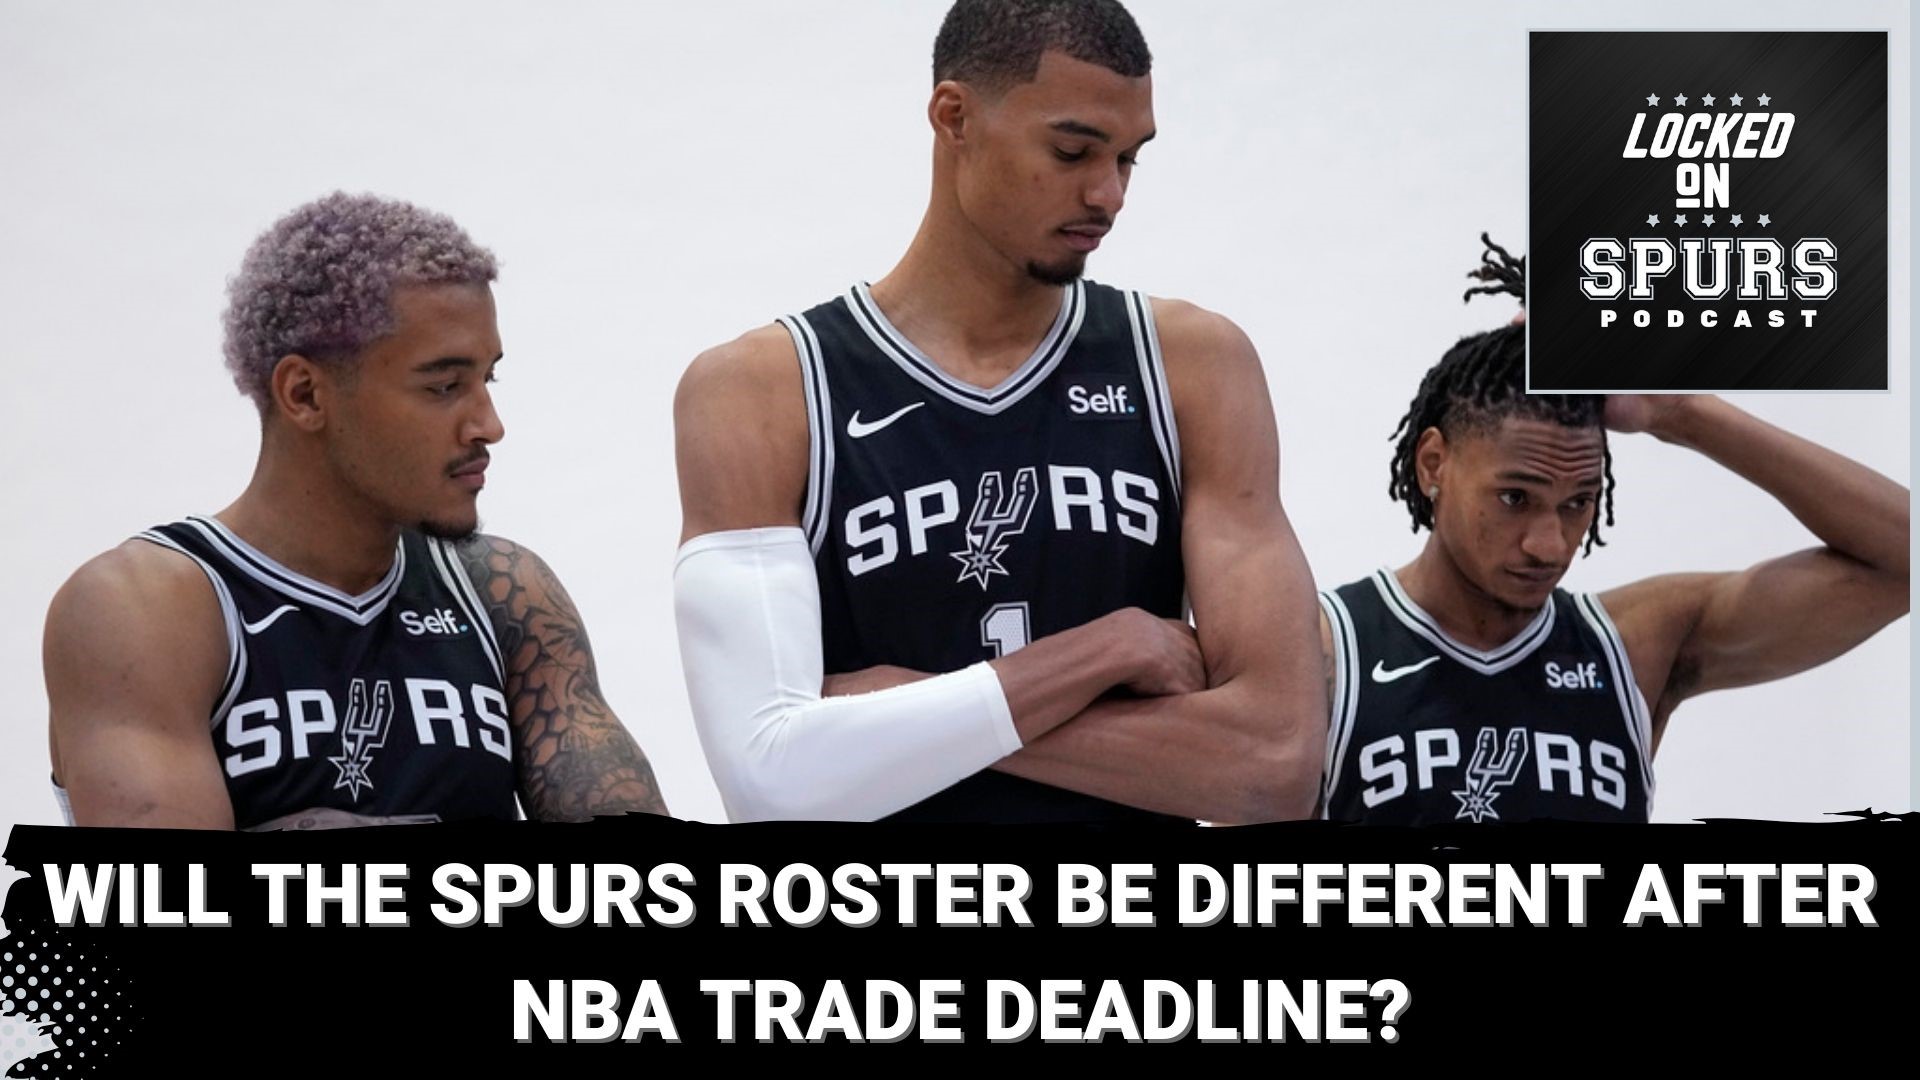 Will the Spurs look the same or players might be gone after the NBA Trade Deadline?